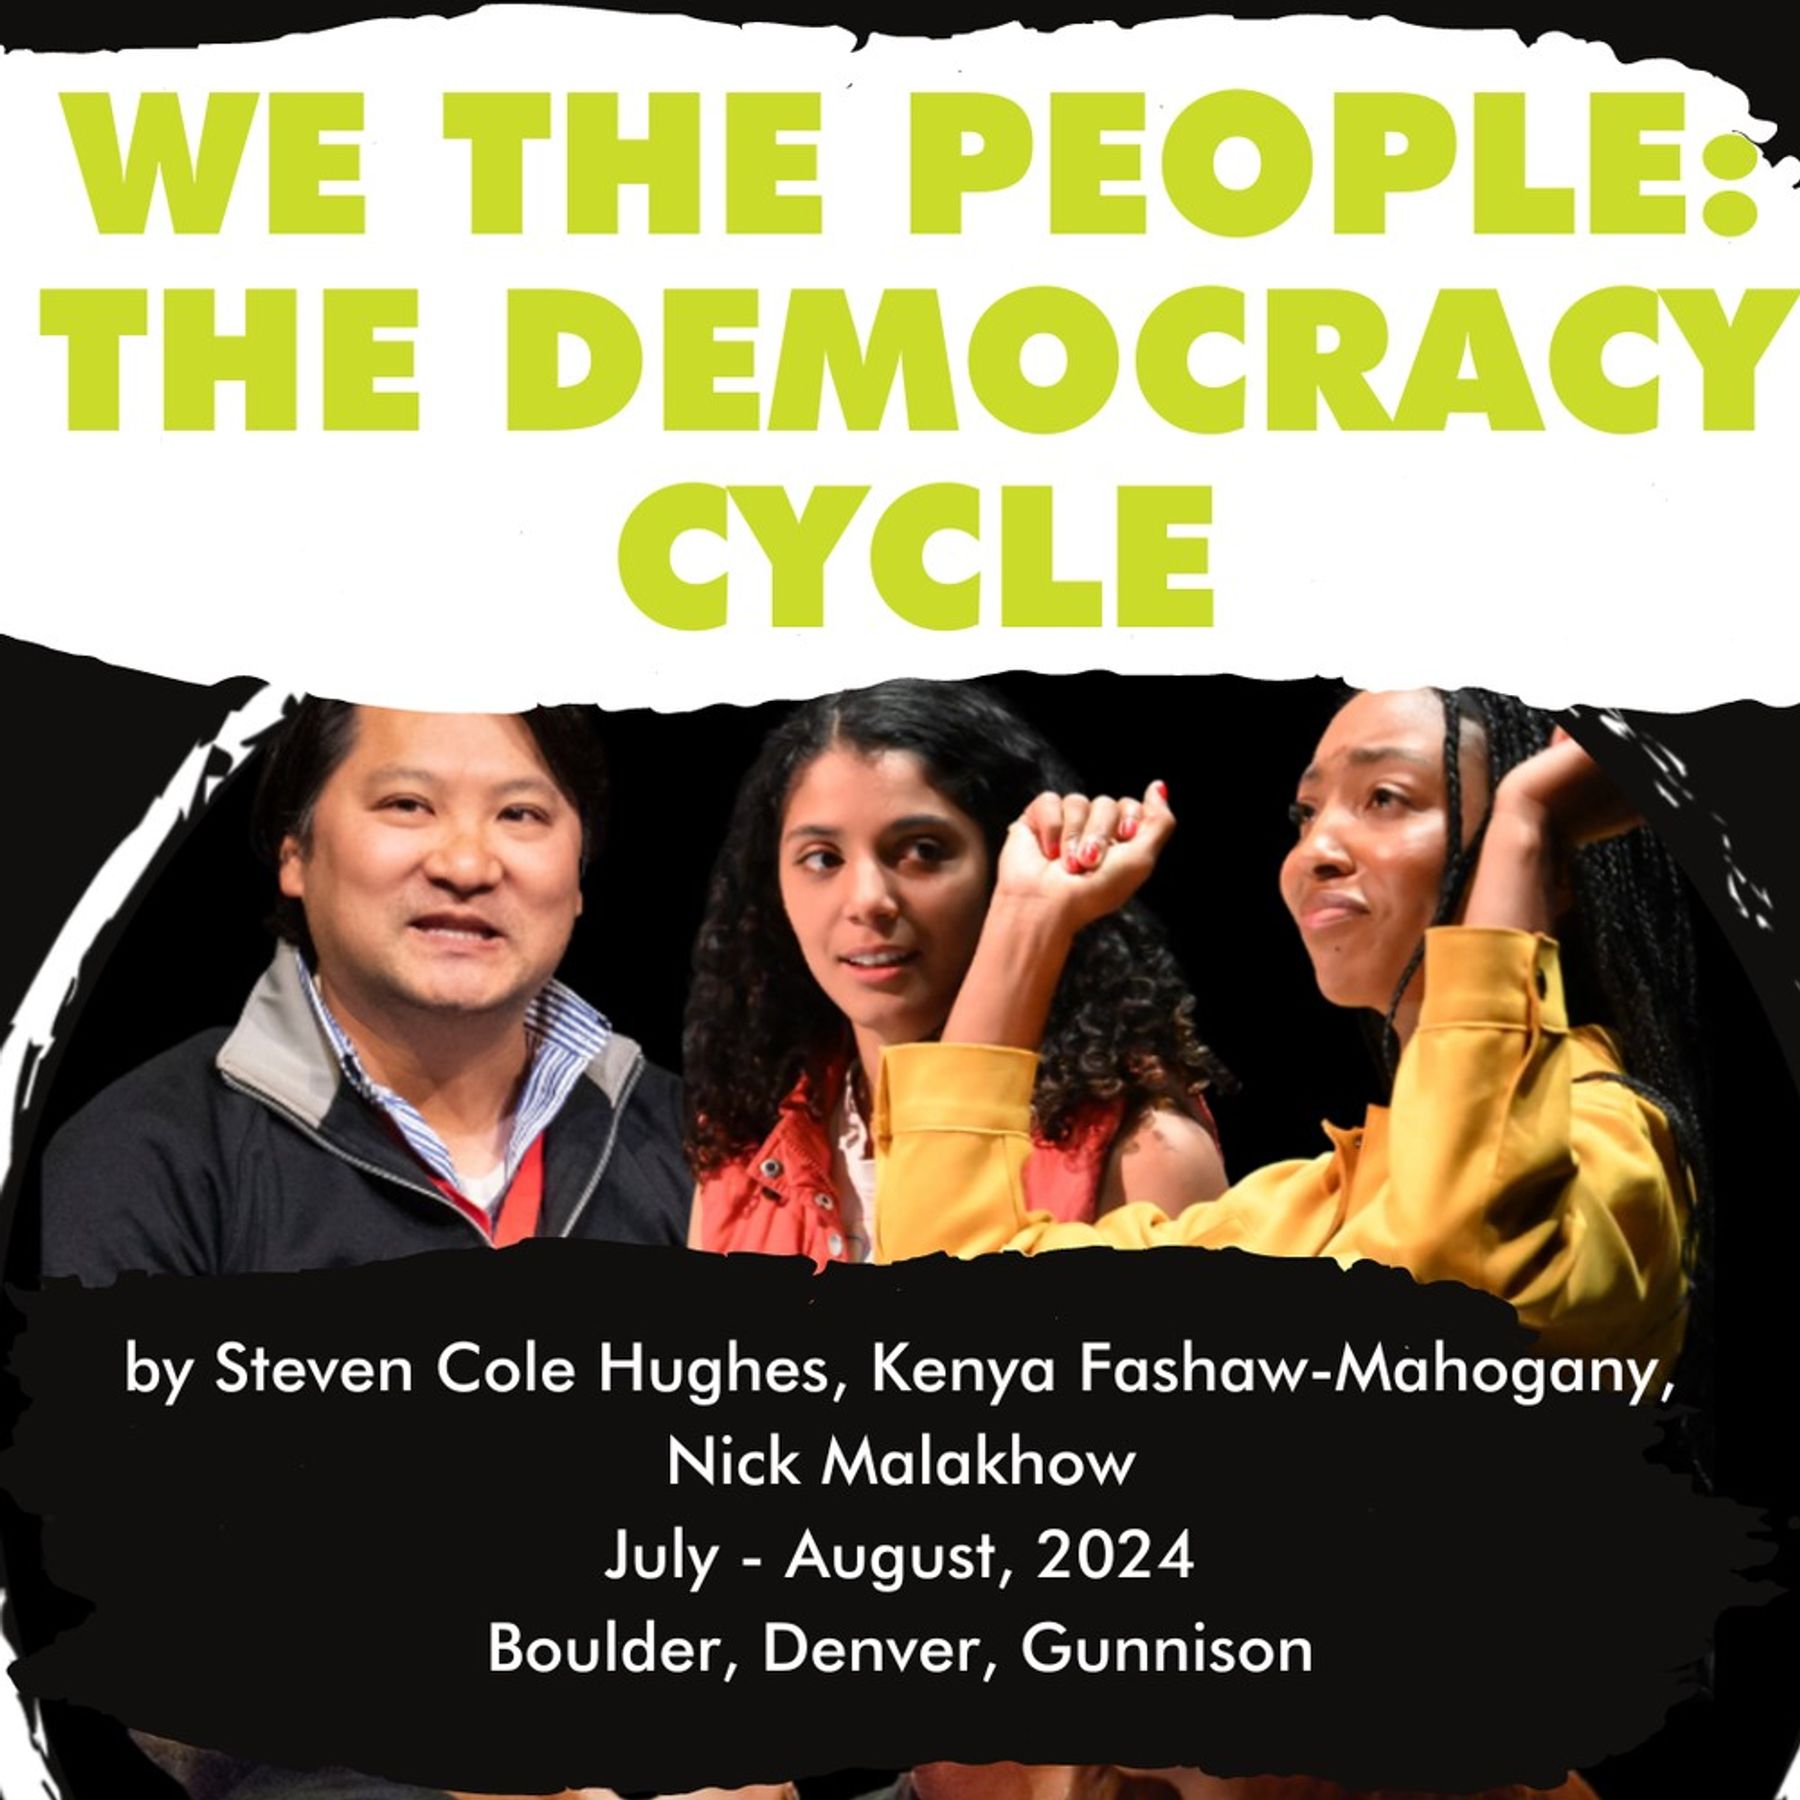 WE THE PEOPLE: THE DEMOCRACY CYCLE